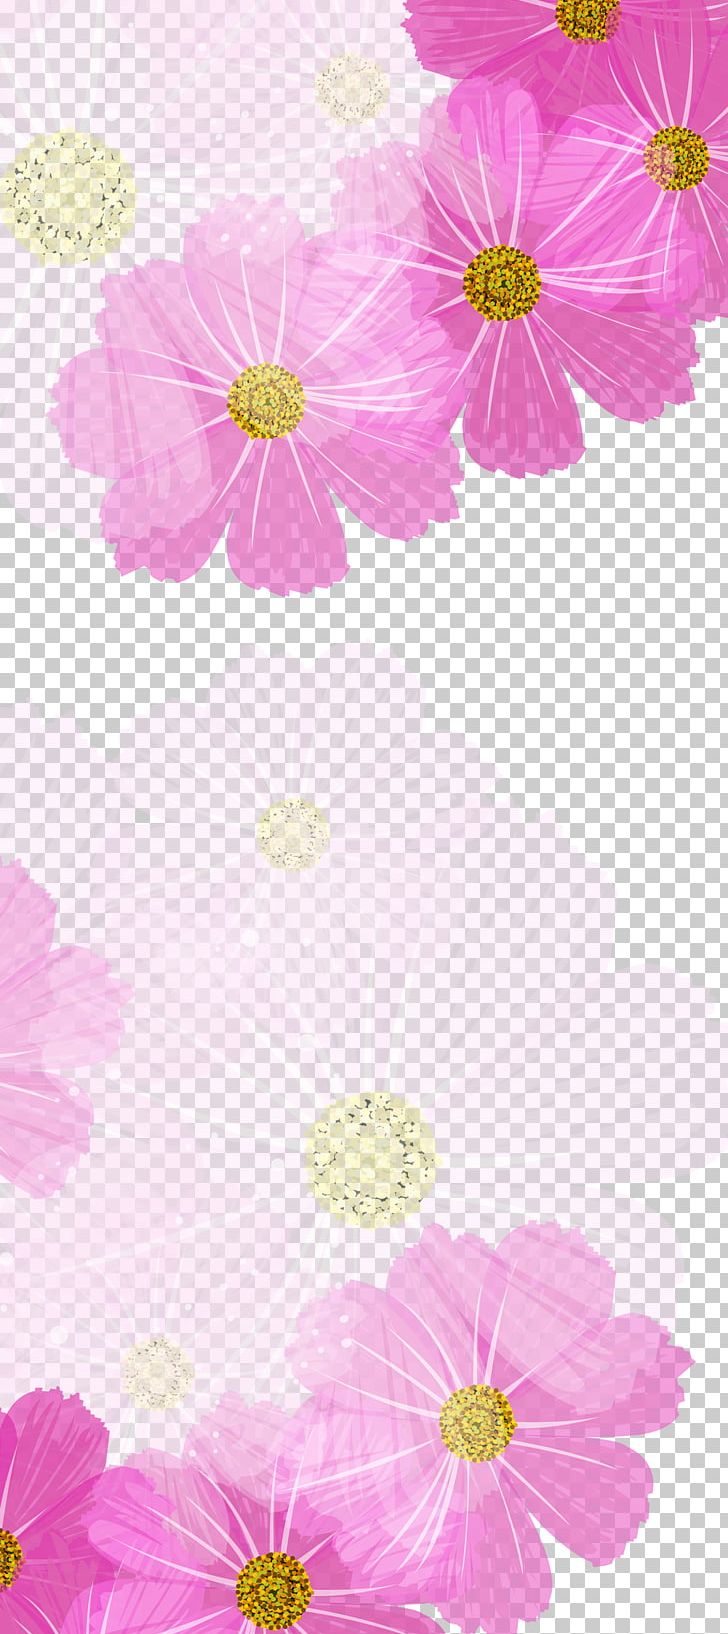 Chrysanthemum Color Purple PNG, Clipart, Cherry Blossom, Color, Dahlia, Daisy Family, Encapsulated Postscript Free PNG Download